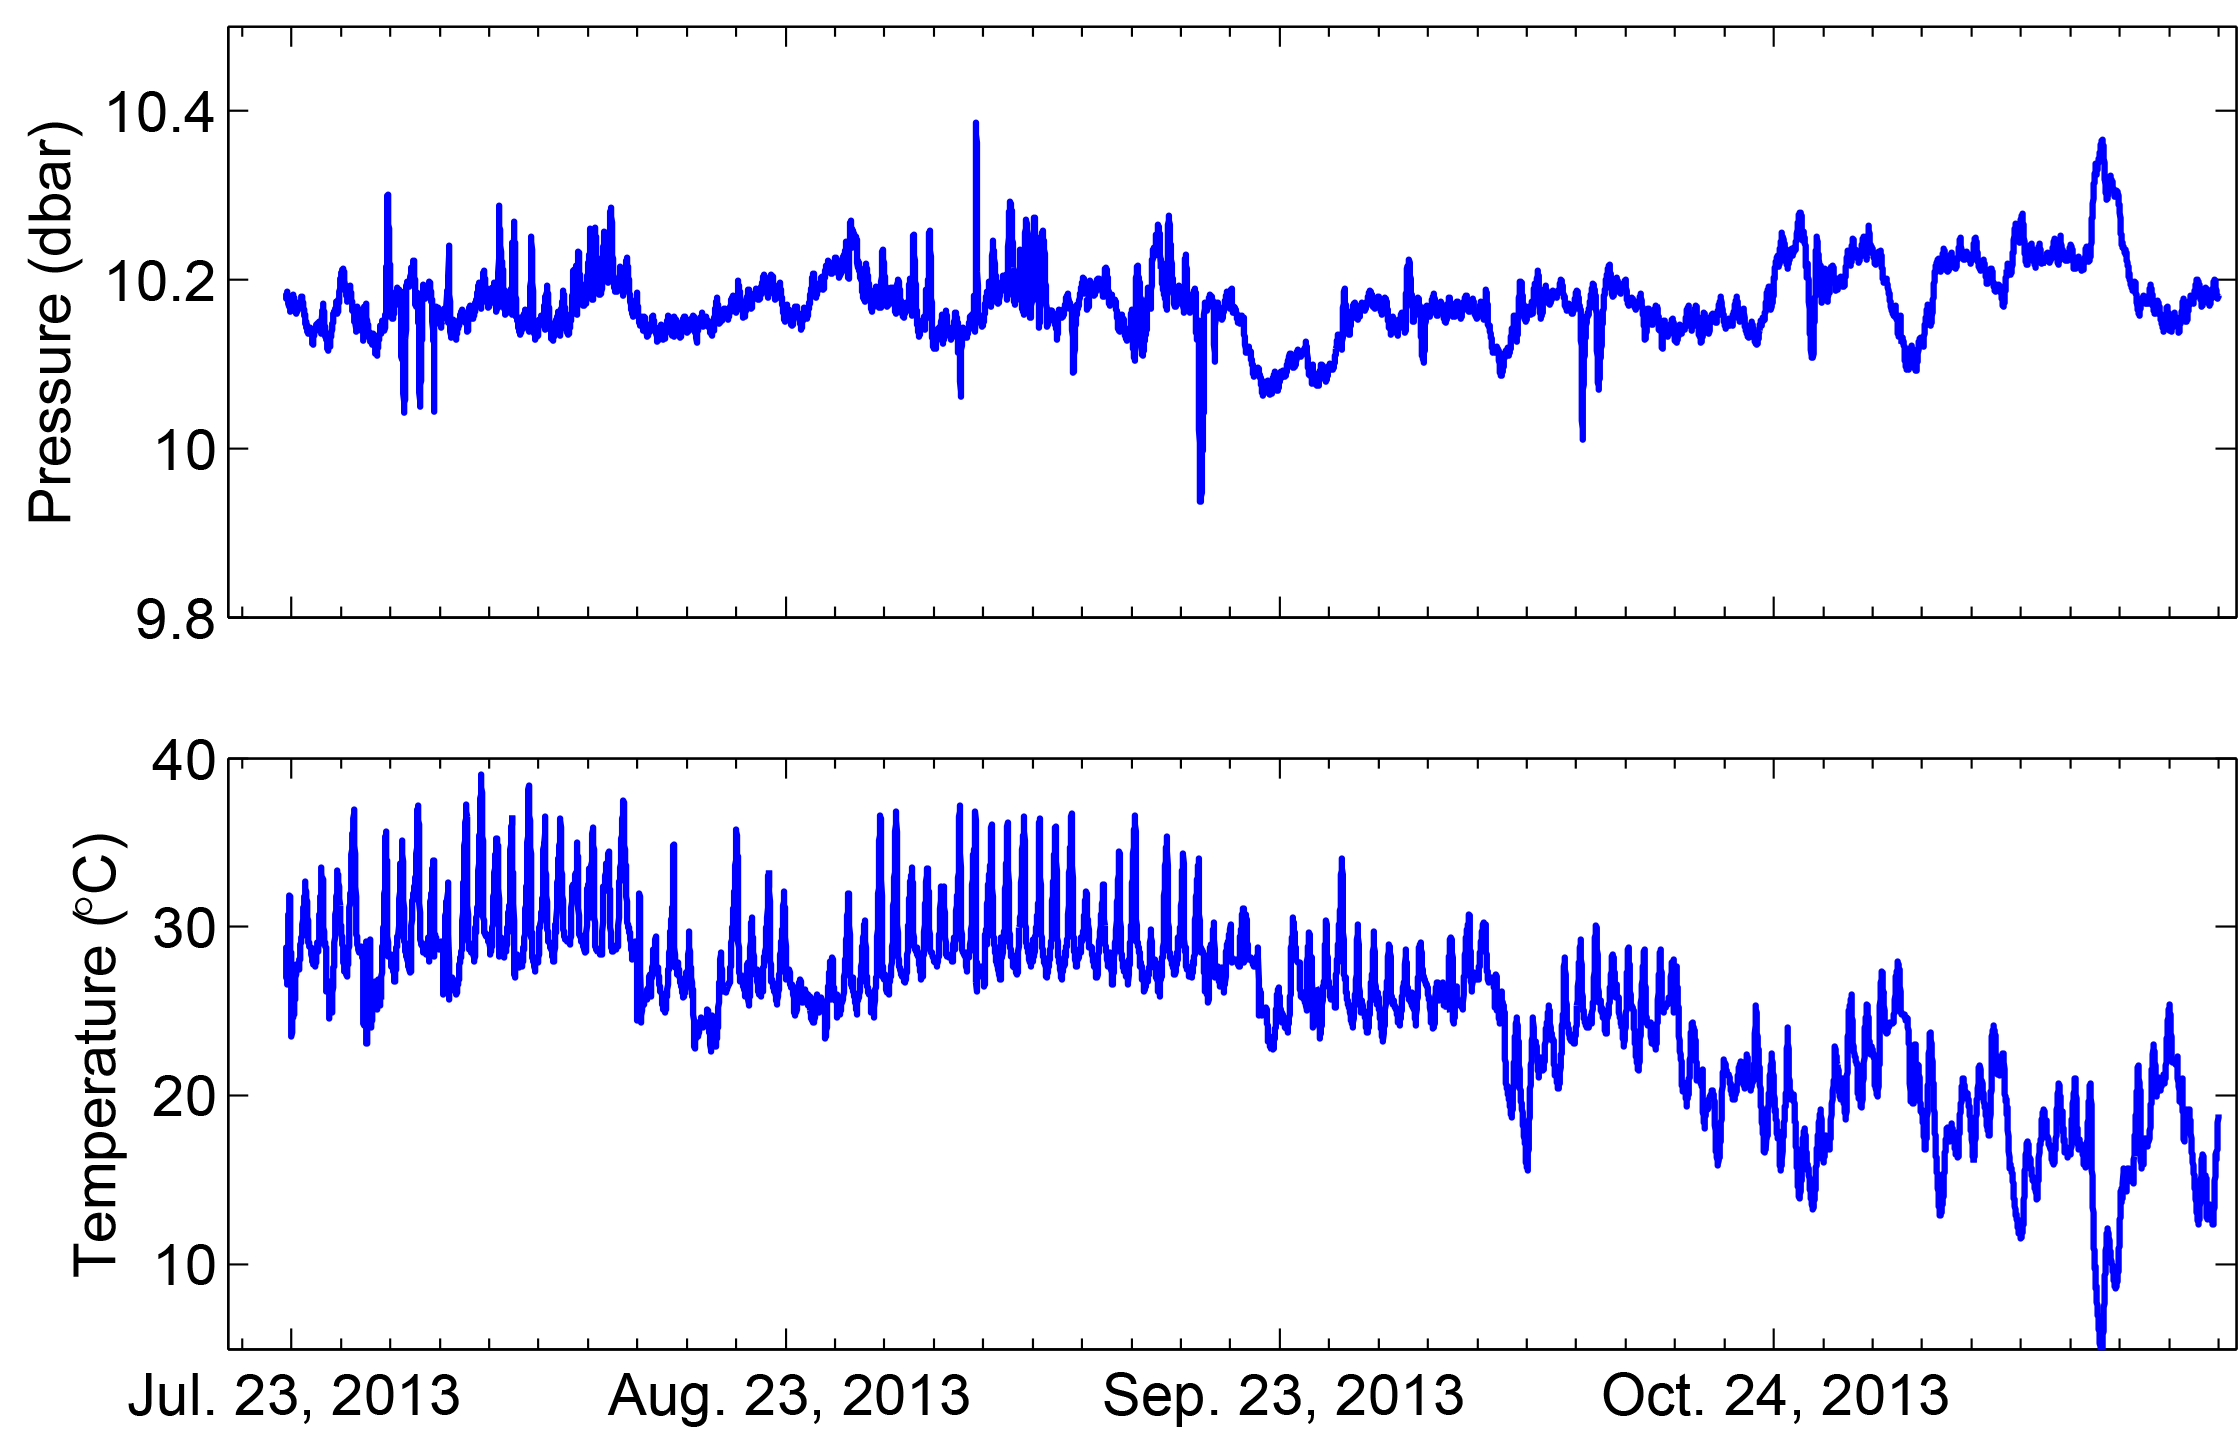 Atmospheric pressure and temperature time series from an Onset Hobo U20 atmospheric pressure sensor mounted on a residential porch railing at site 965 on Dauphin Island, Alabama, in 2013.